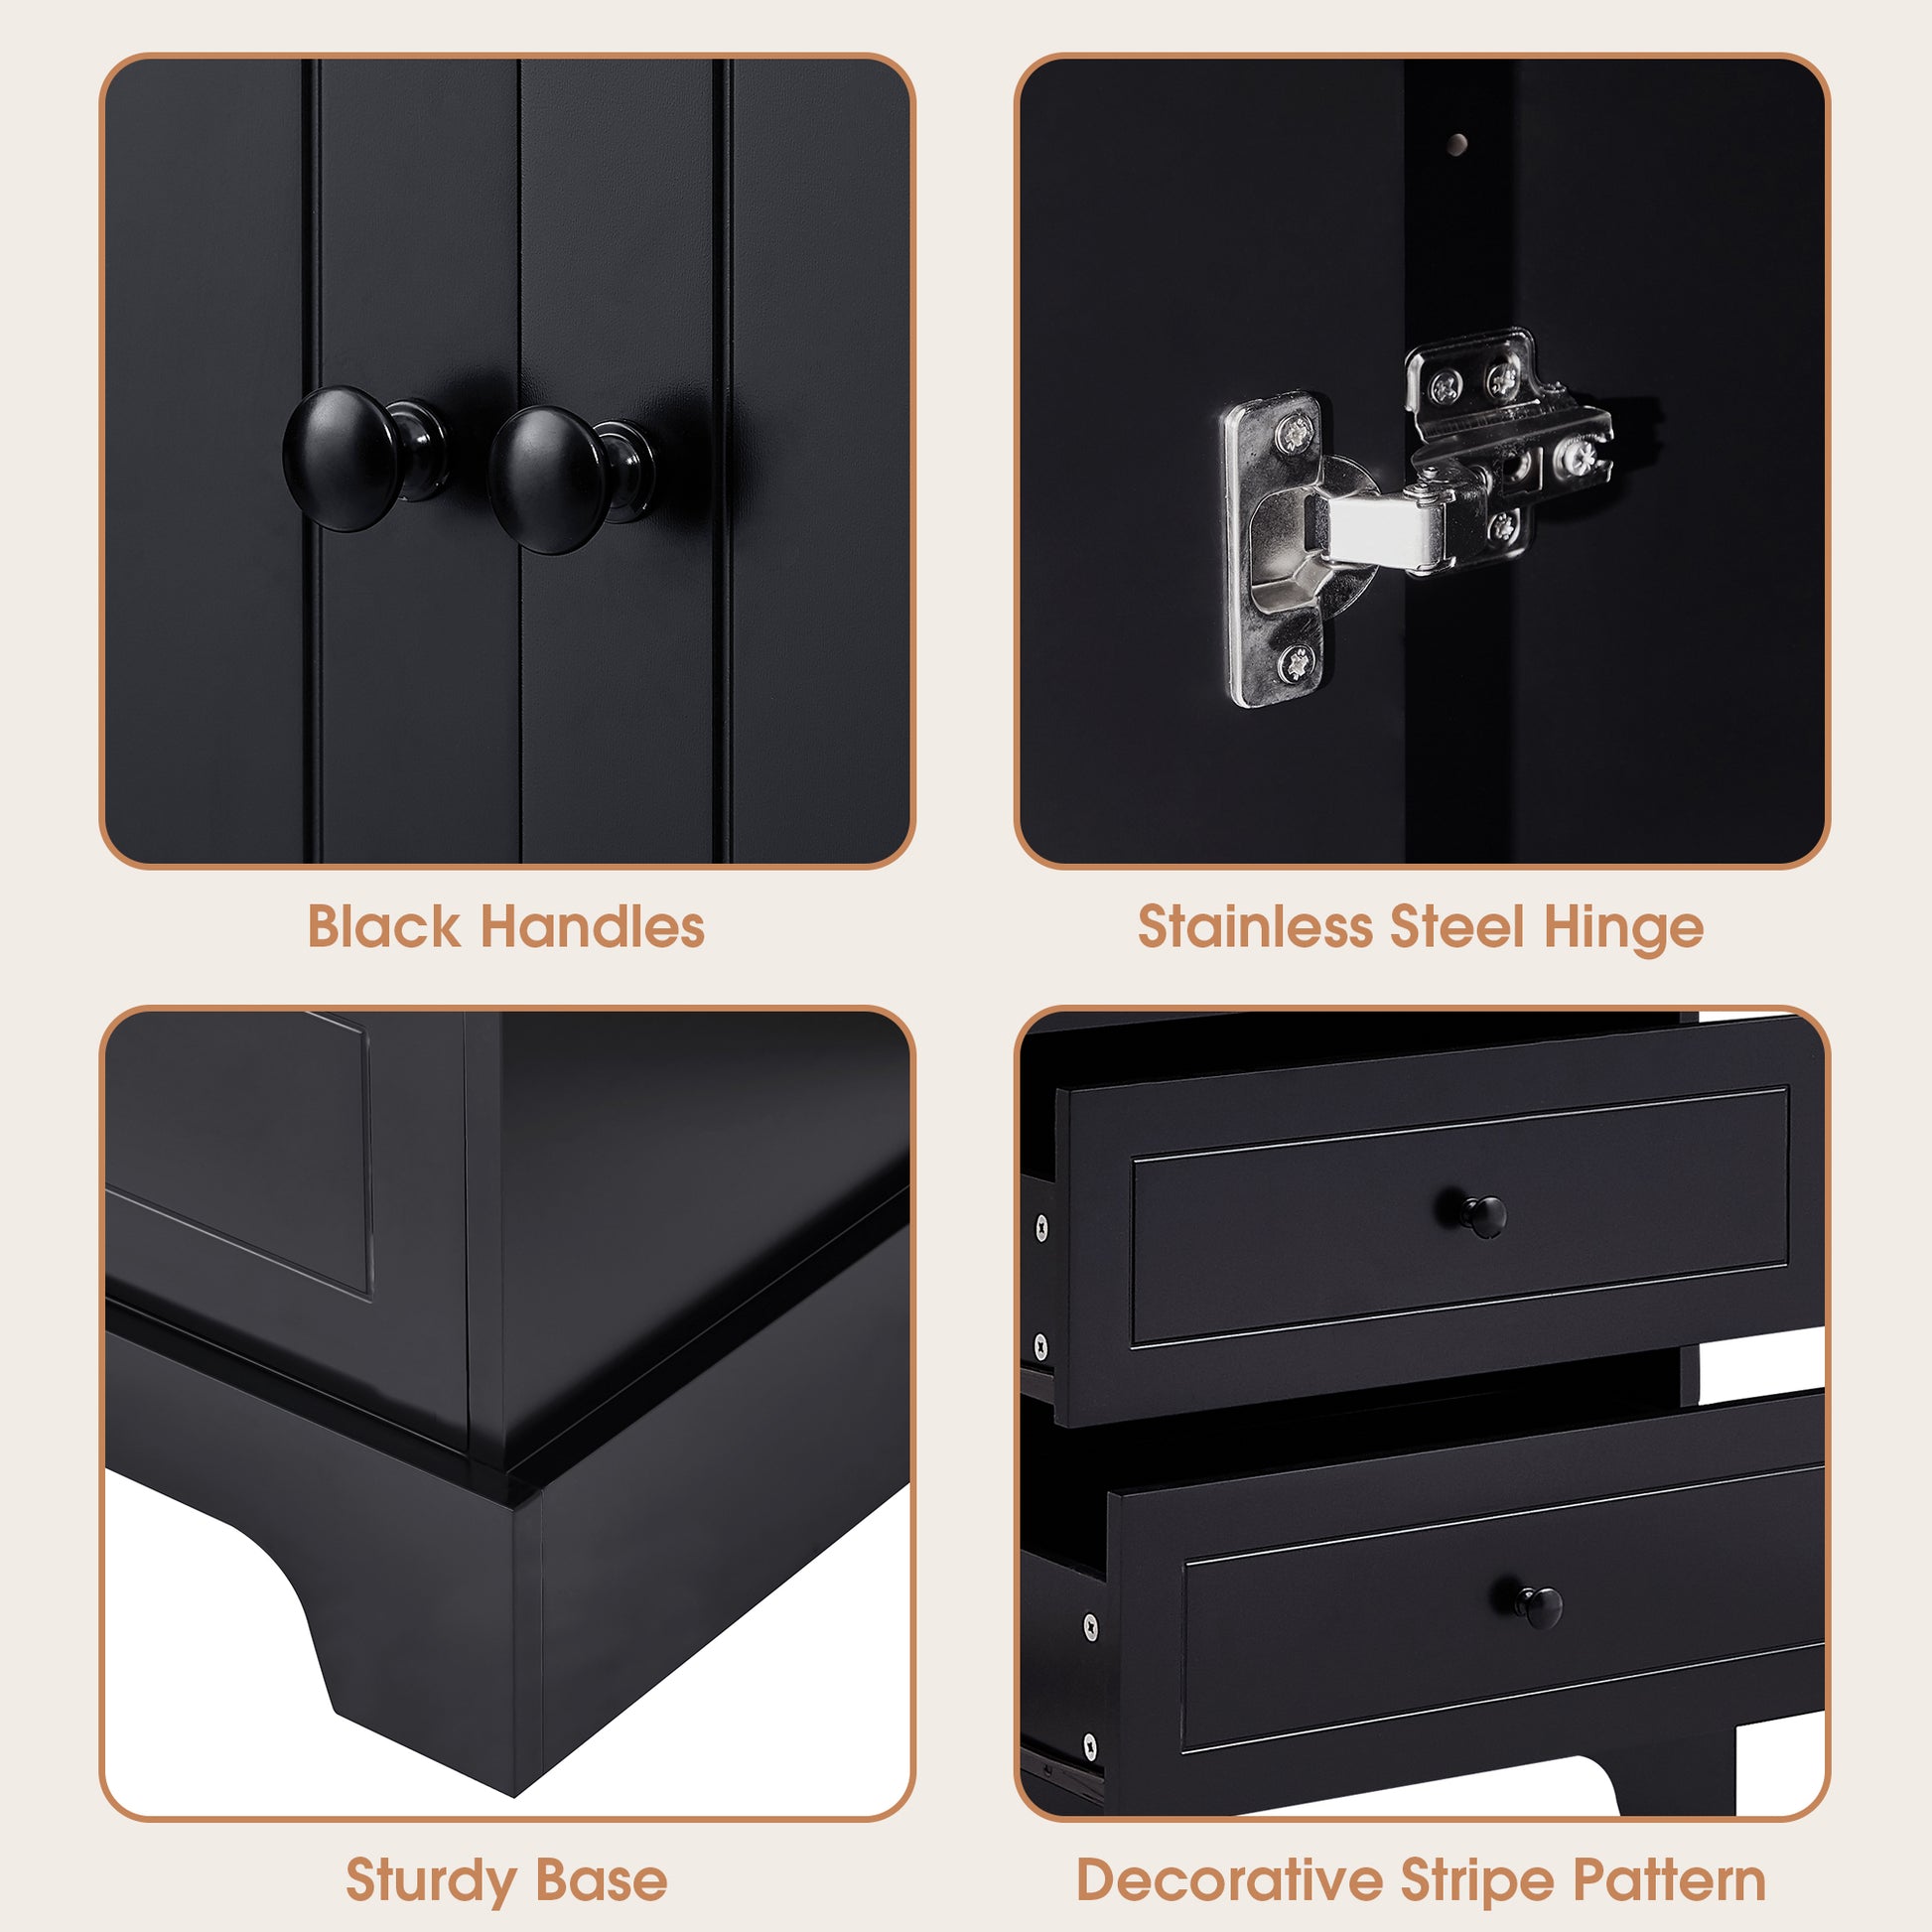 Storage Cabinet with 2 Doors and 4 Drawers for black-mdf